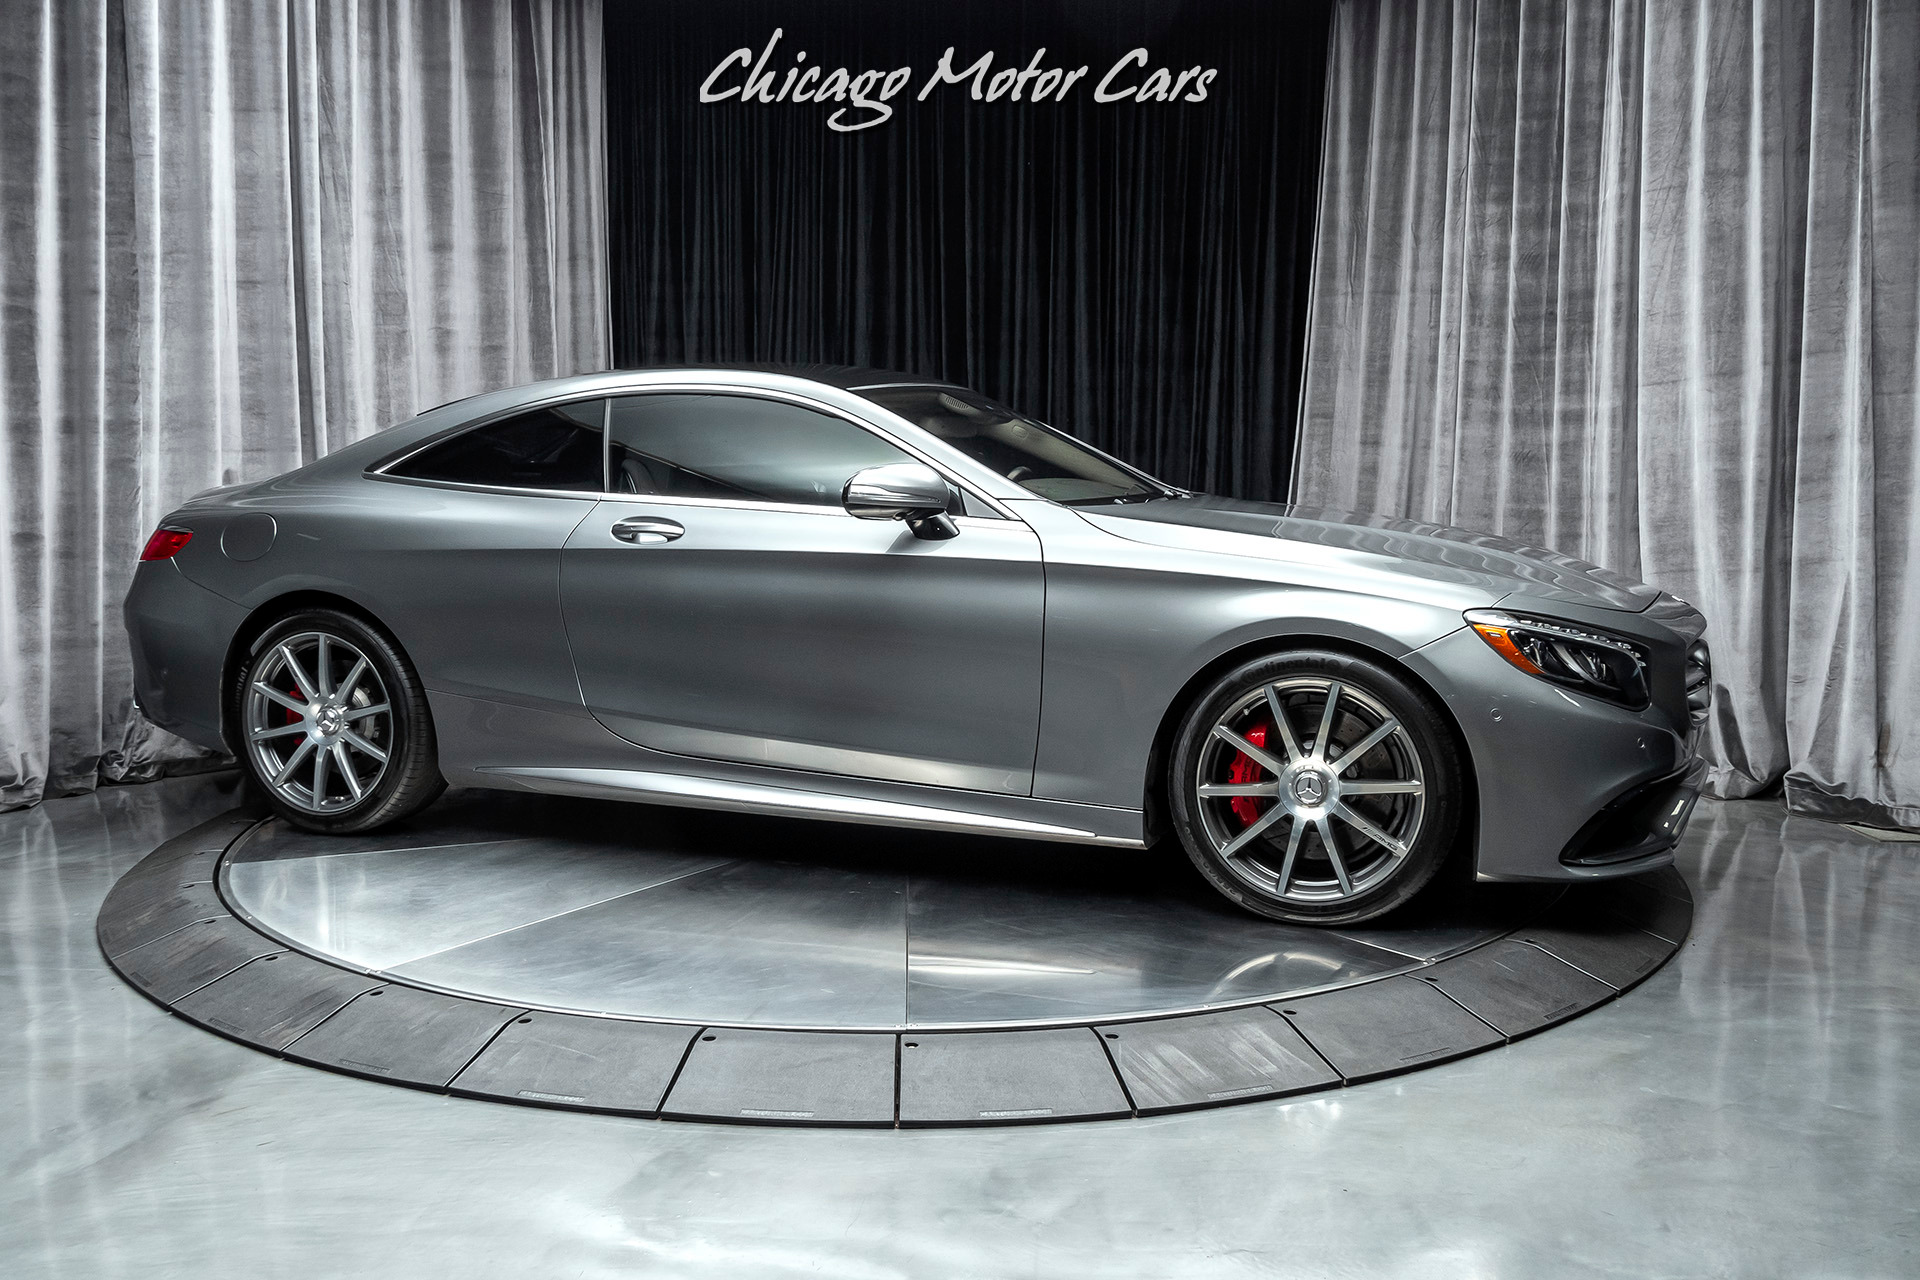 Used-2015-Mercedes-Benz-S-Class-S63-AMG-185kMSRP-Magic-Sky-Control-25k-in-Options